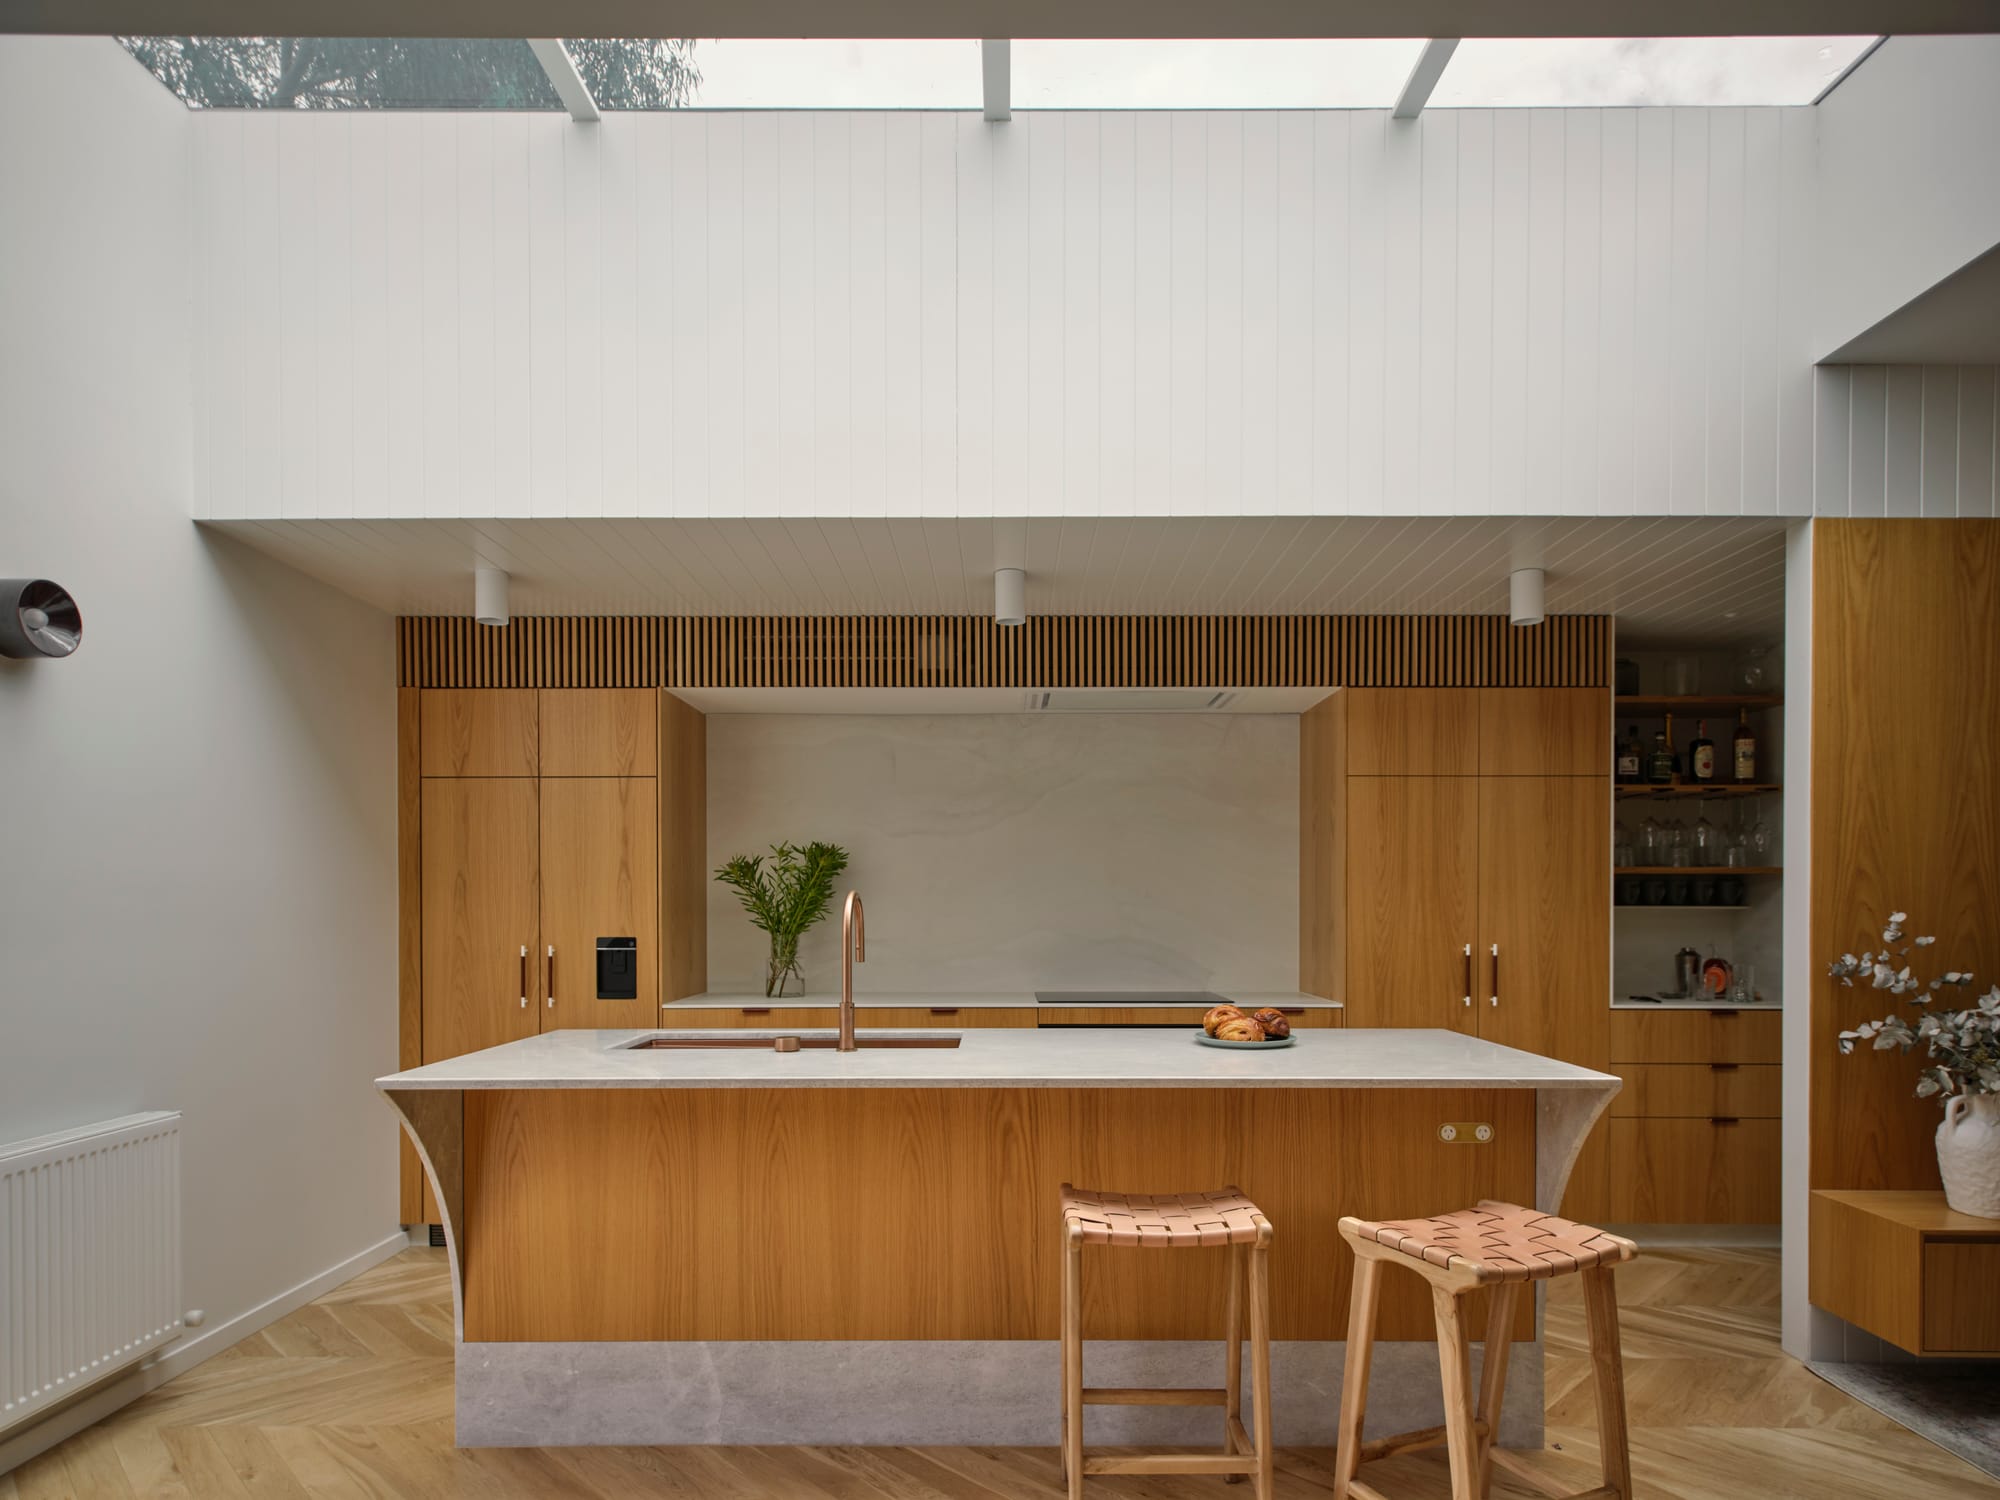 ZigZag House by True Story. Photography by Dean Bradley. Kitchen with warm timber cabinetry and timber herringbone floors. Overhead skylight, white walls.